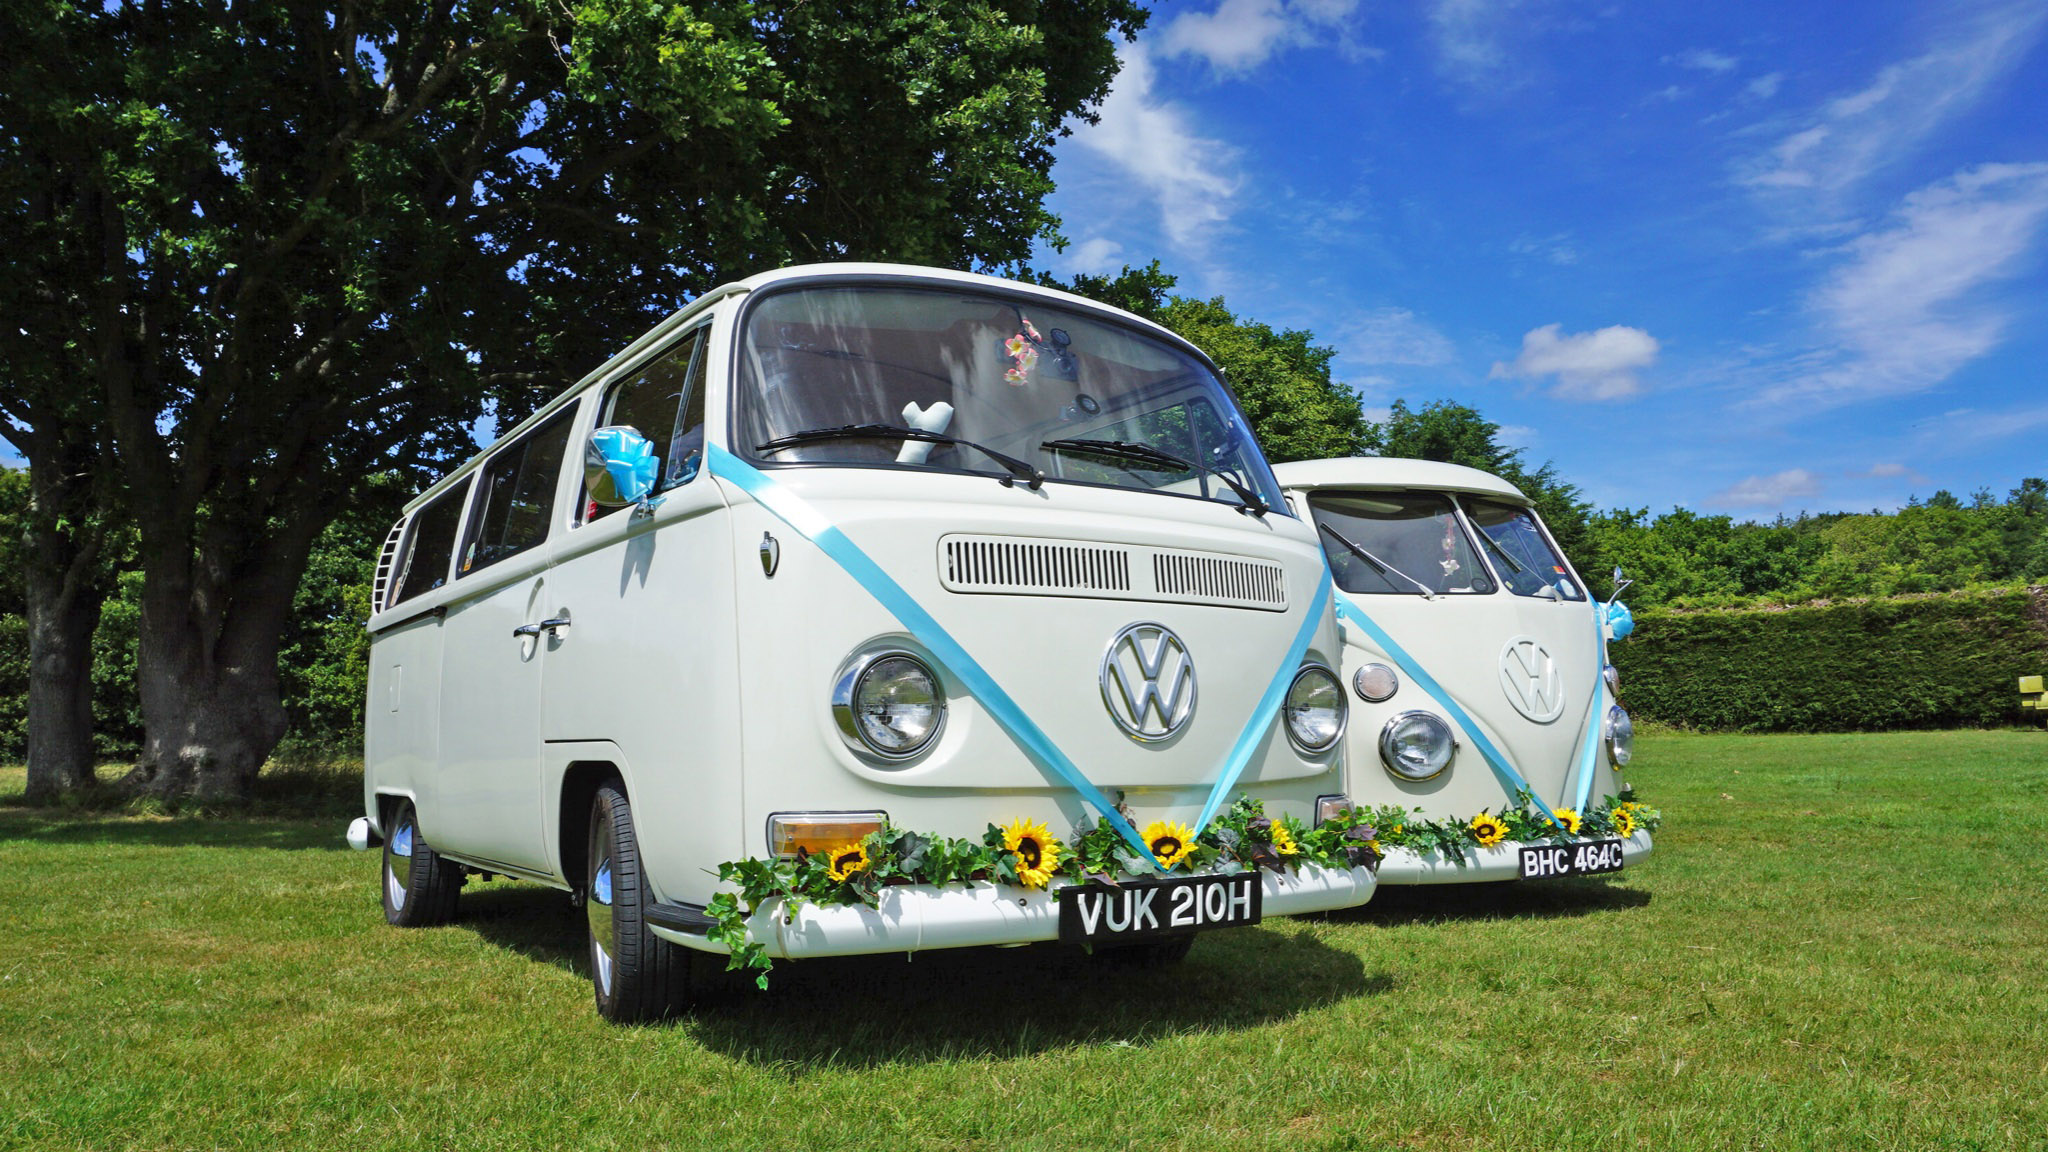 Two Classic VW Campervans decorated with turquoise blue Ribbons at a local Sunbury-on-Thames park with green trees in the background